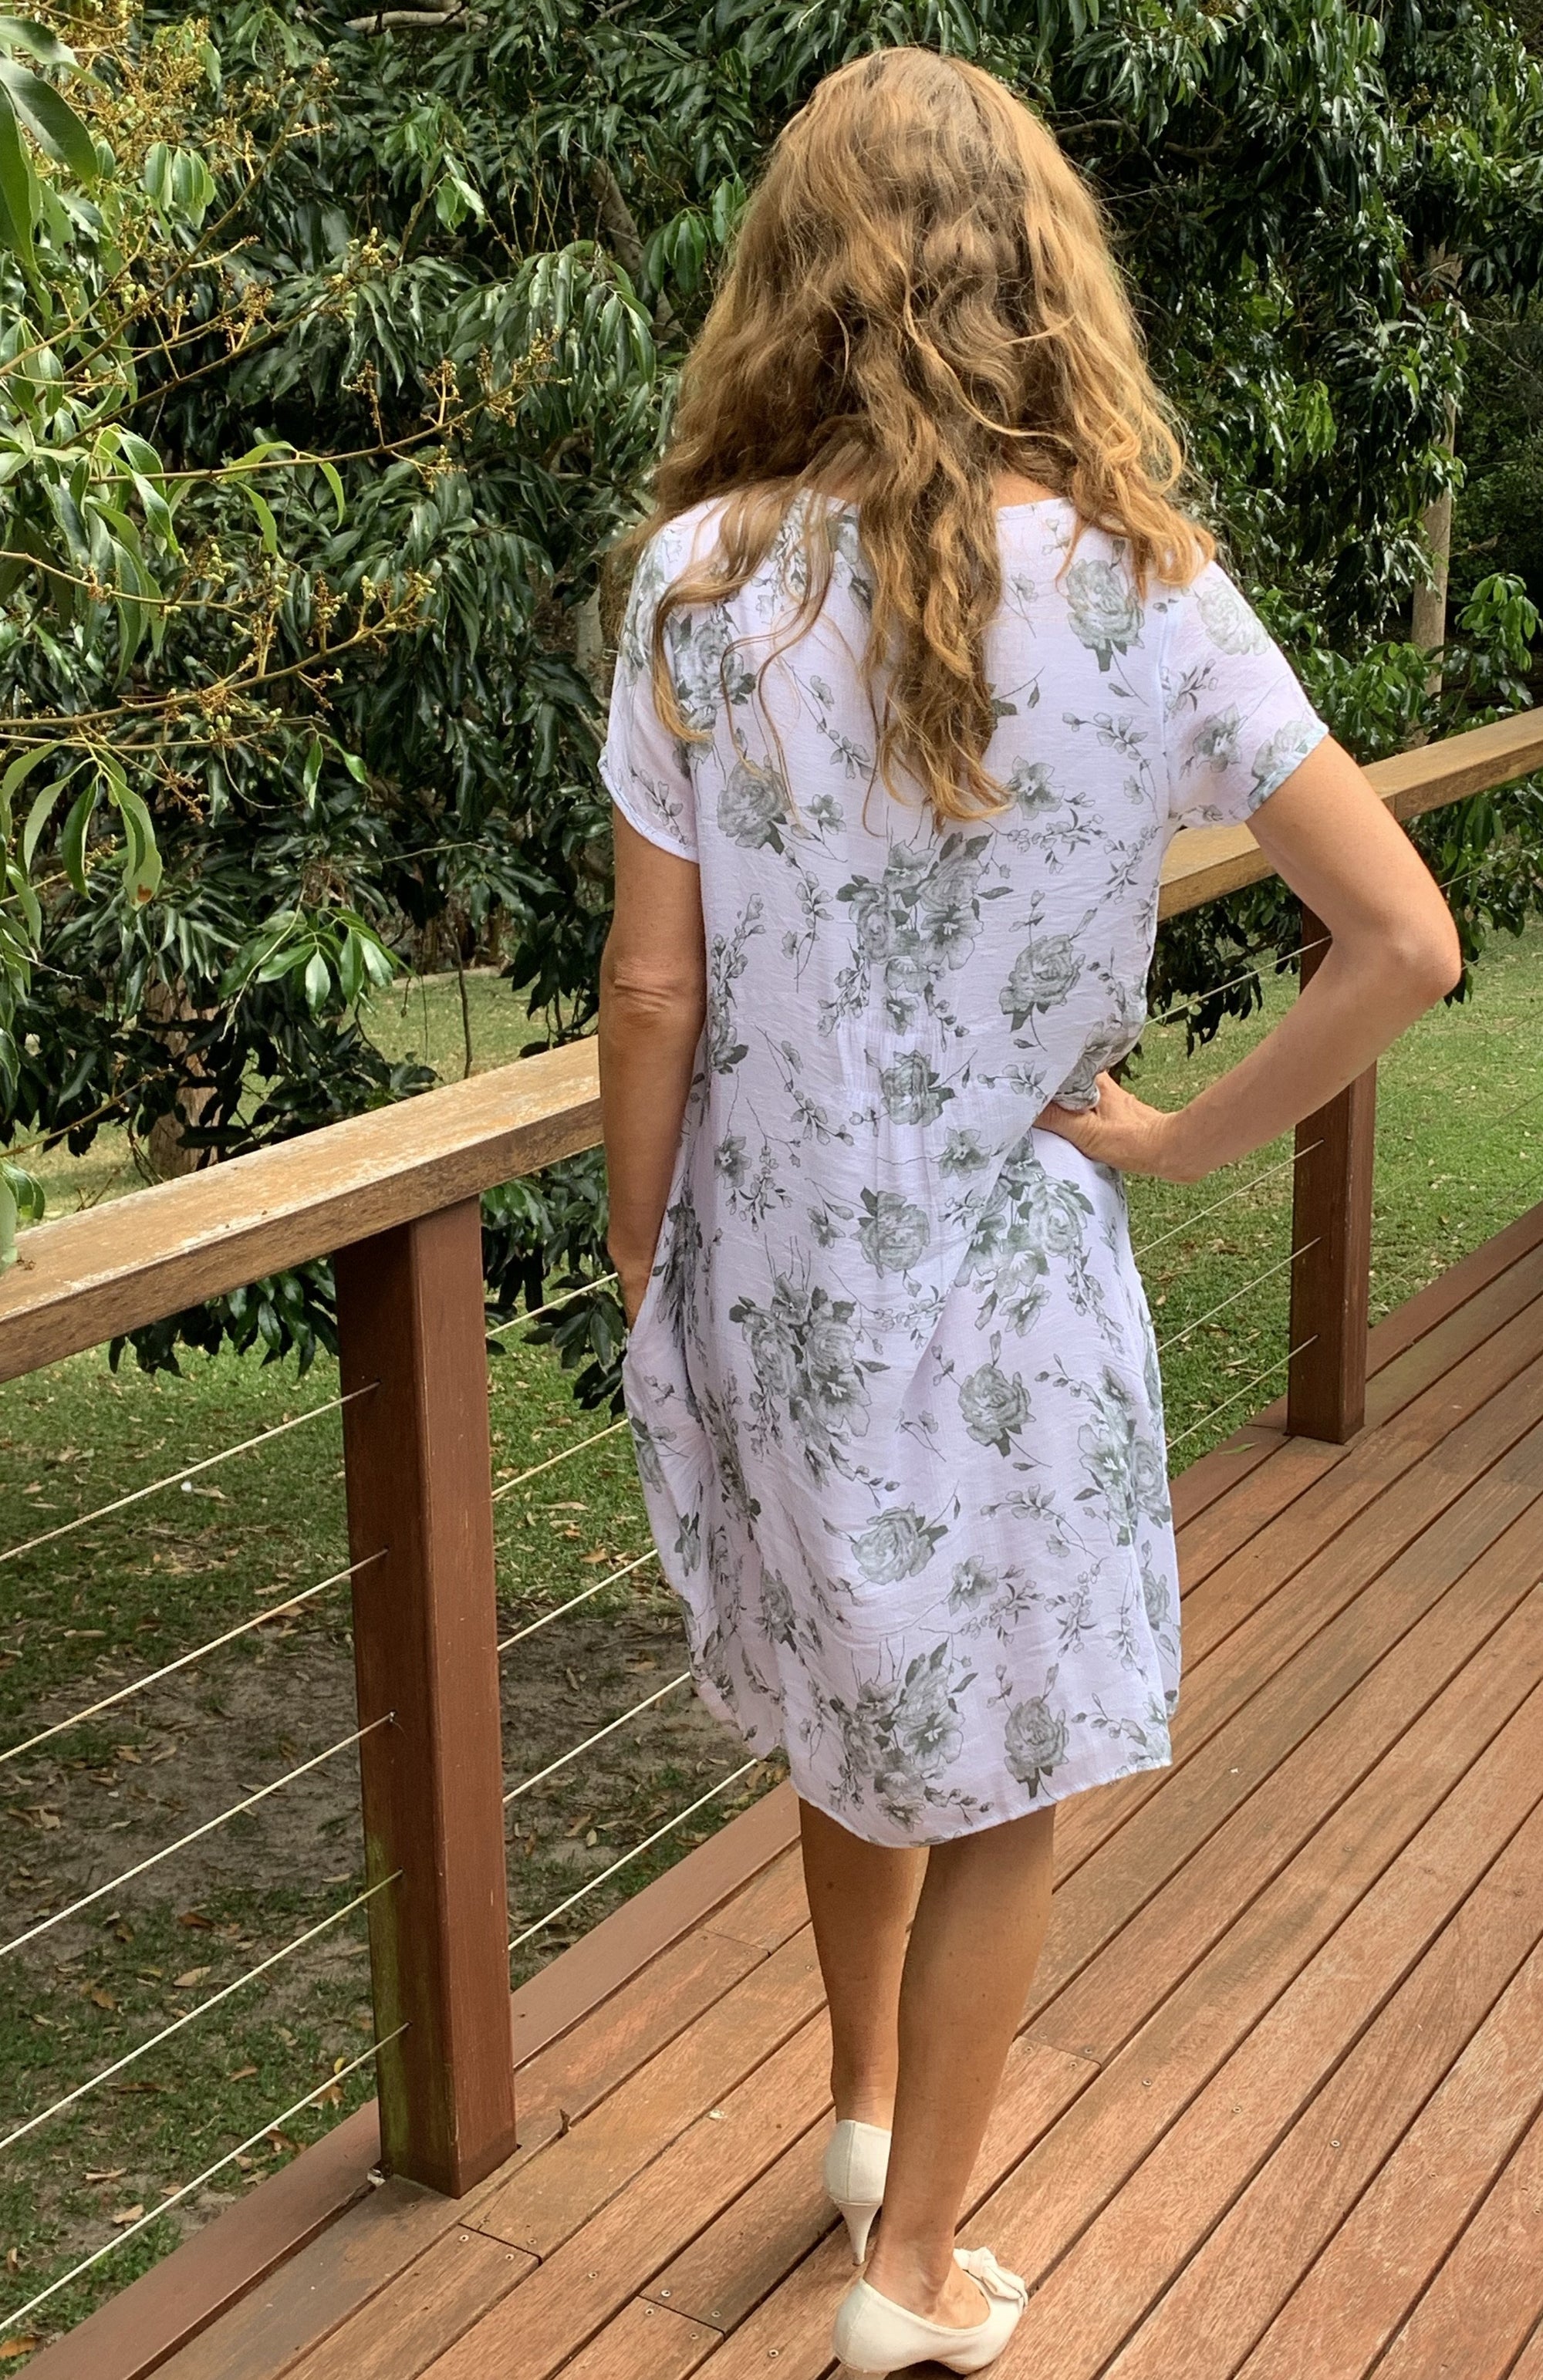 Pocket Dress in White with Green Floral Pattern Knee Length & Short Sleeves - Willow Tree